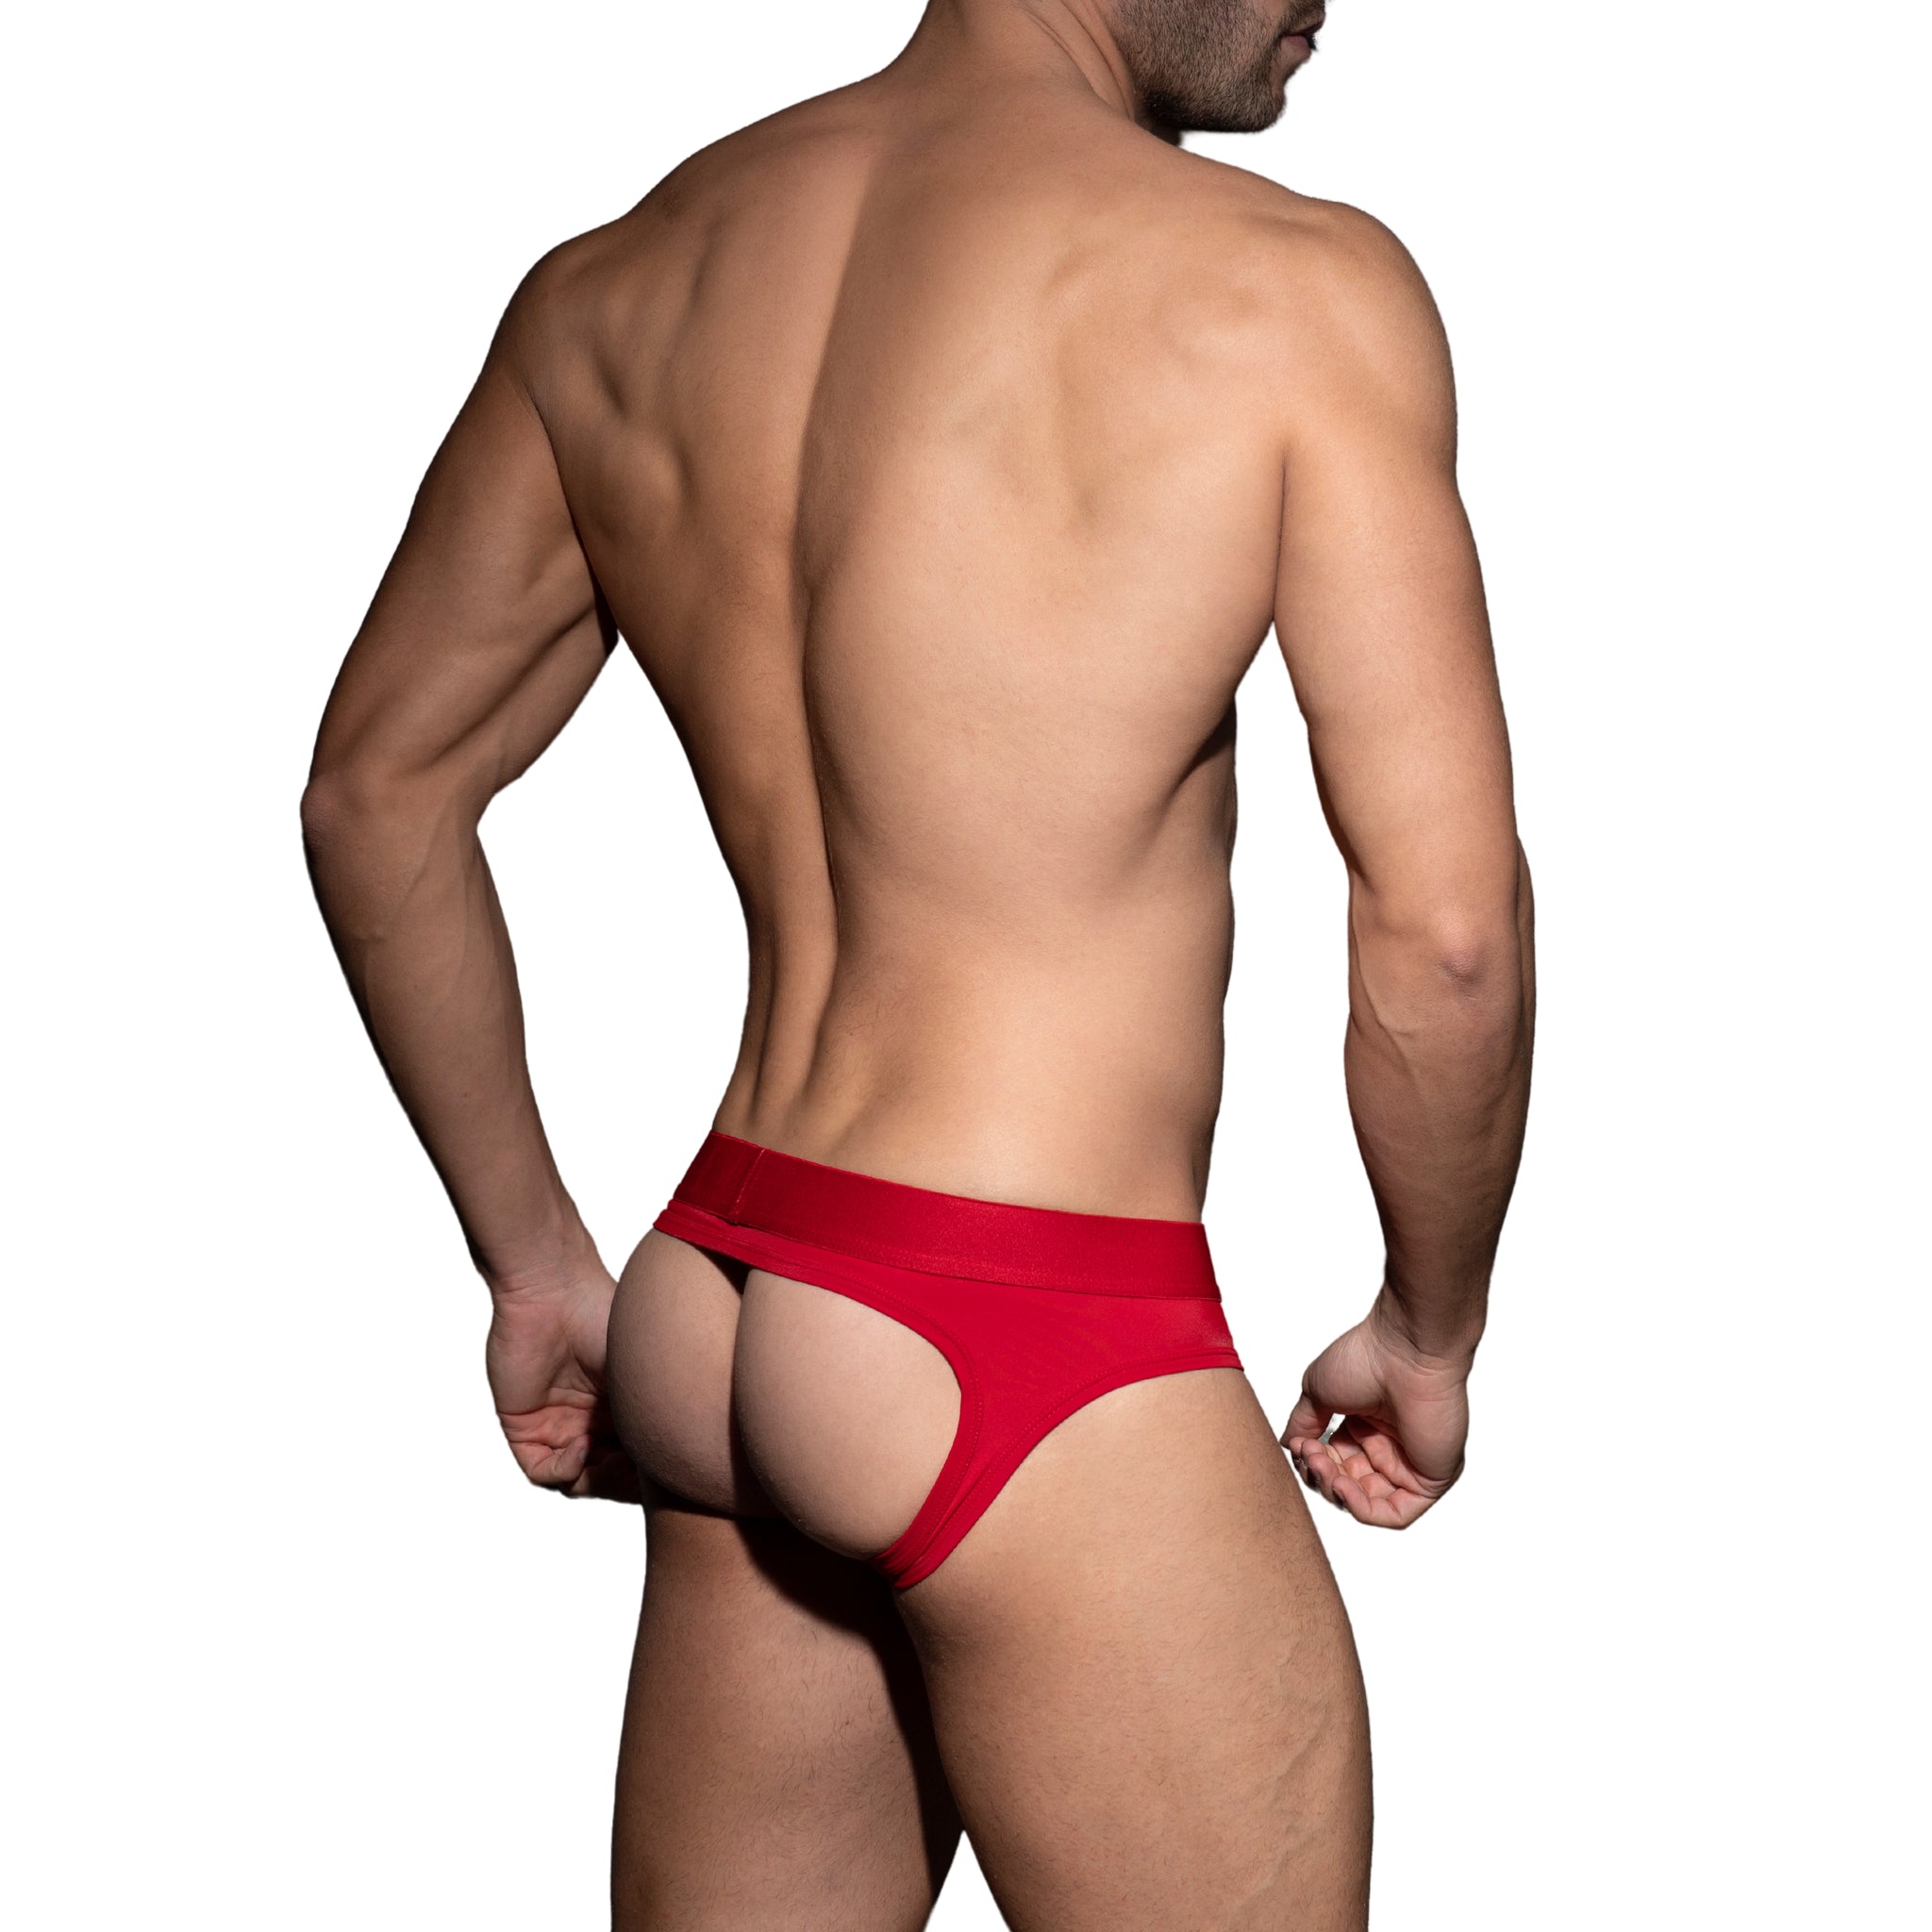 AD Fetish Bottomless Fetish Brief Red ADF92